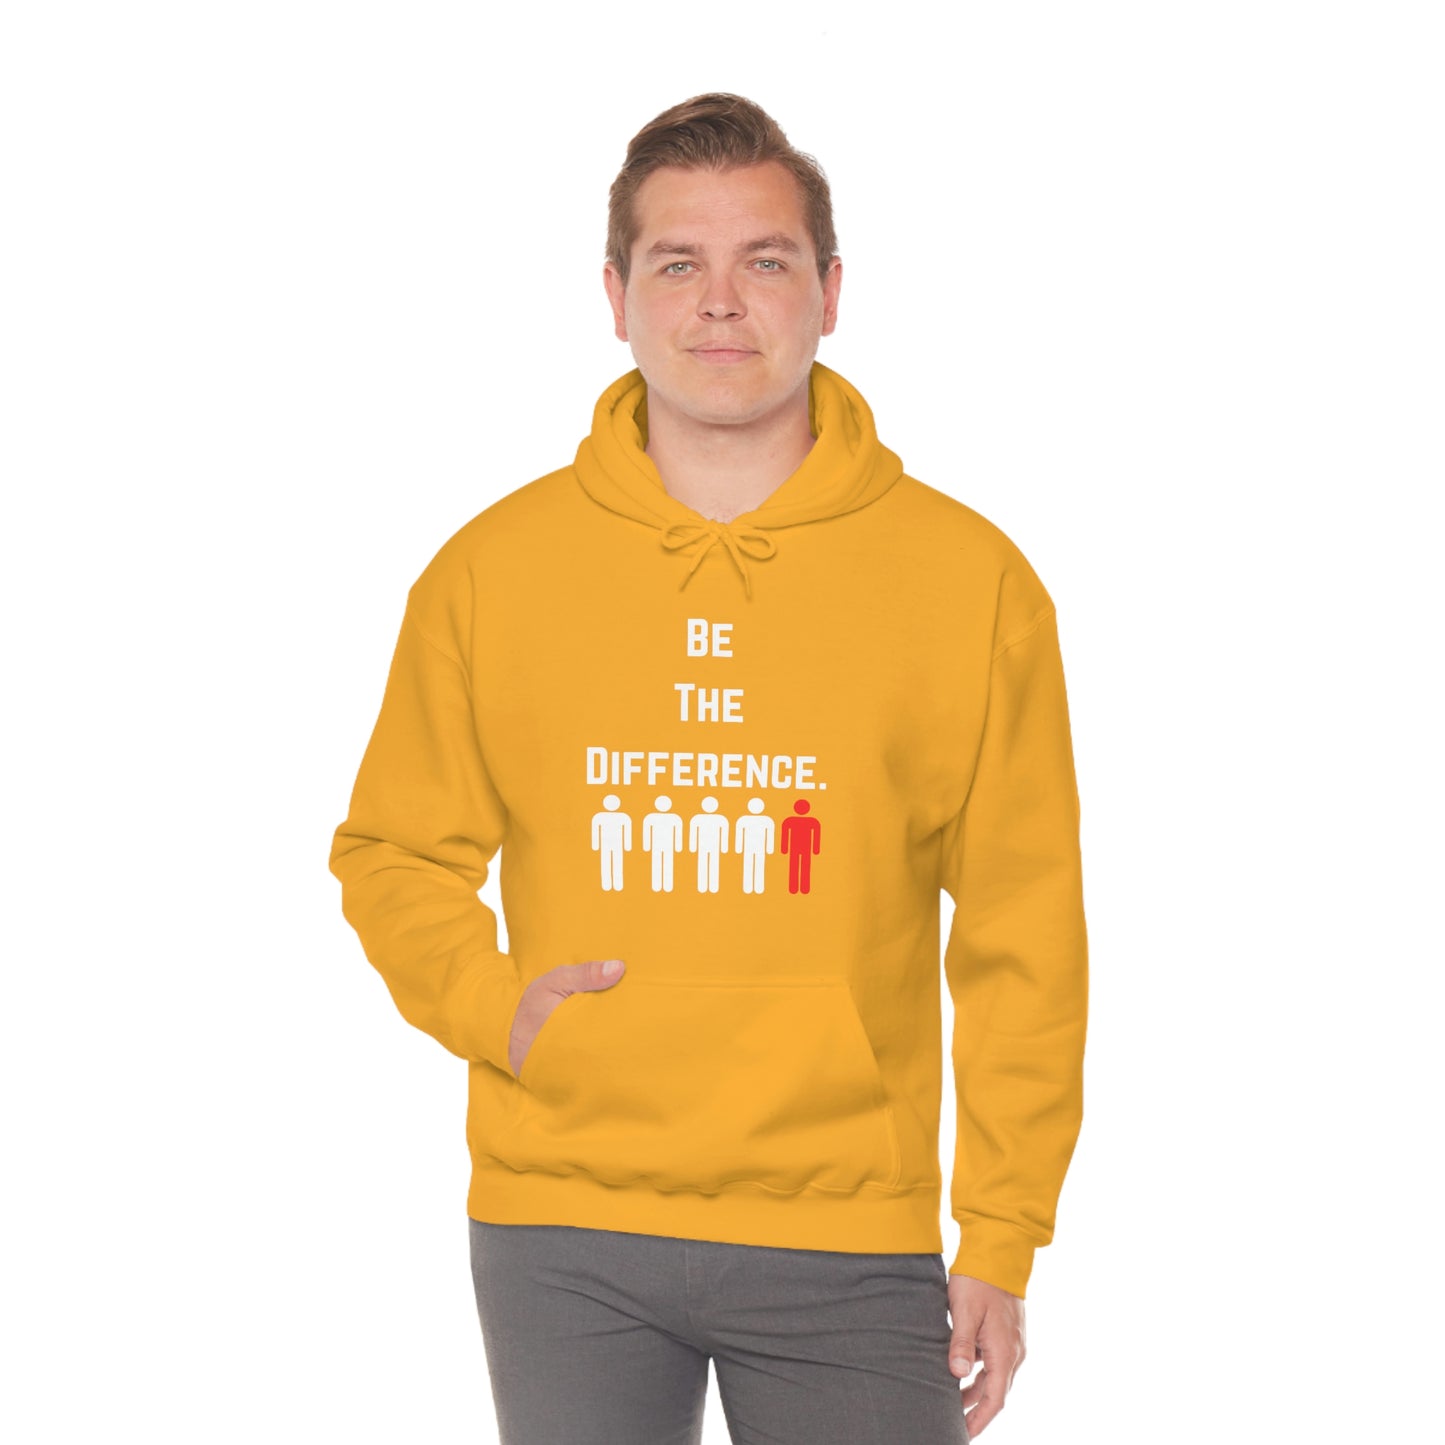 Be The Difference. Hoodie